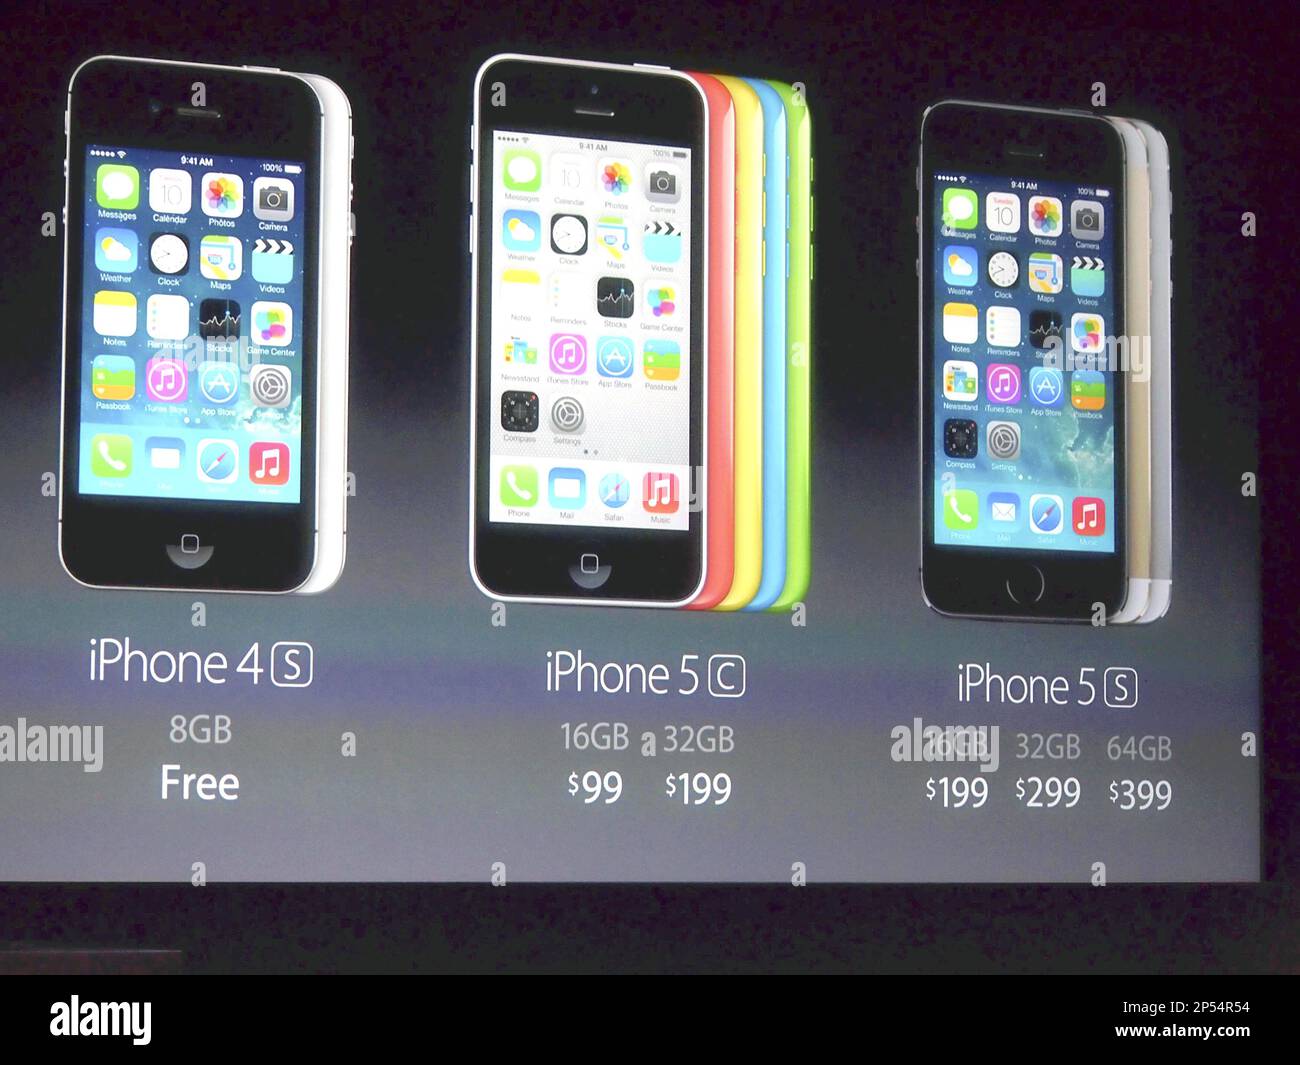 Apple Inc.unveil iPhone 5S and lower- priced iPhone 5C smartphones